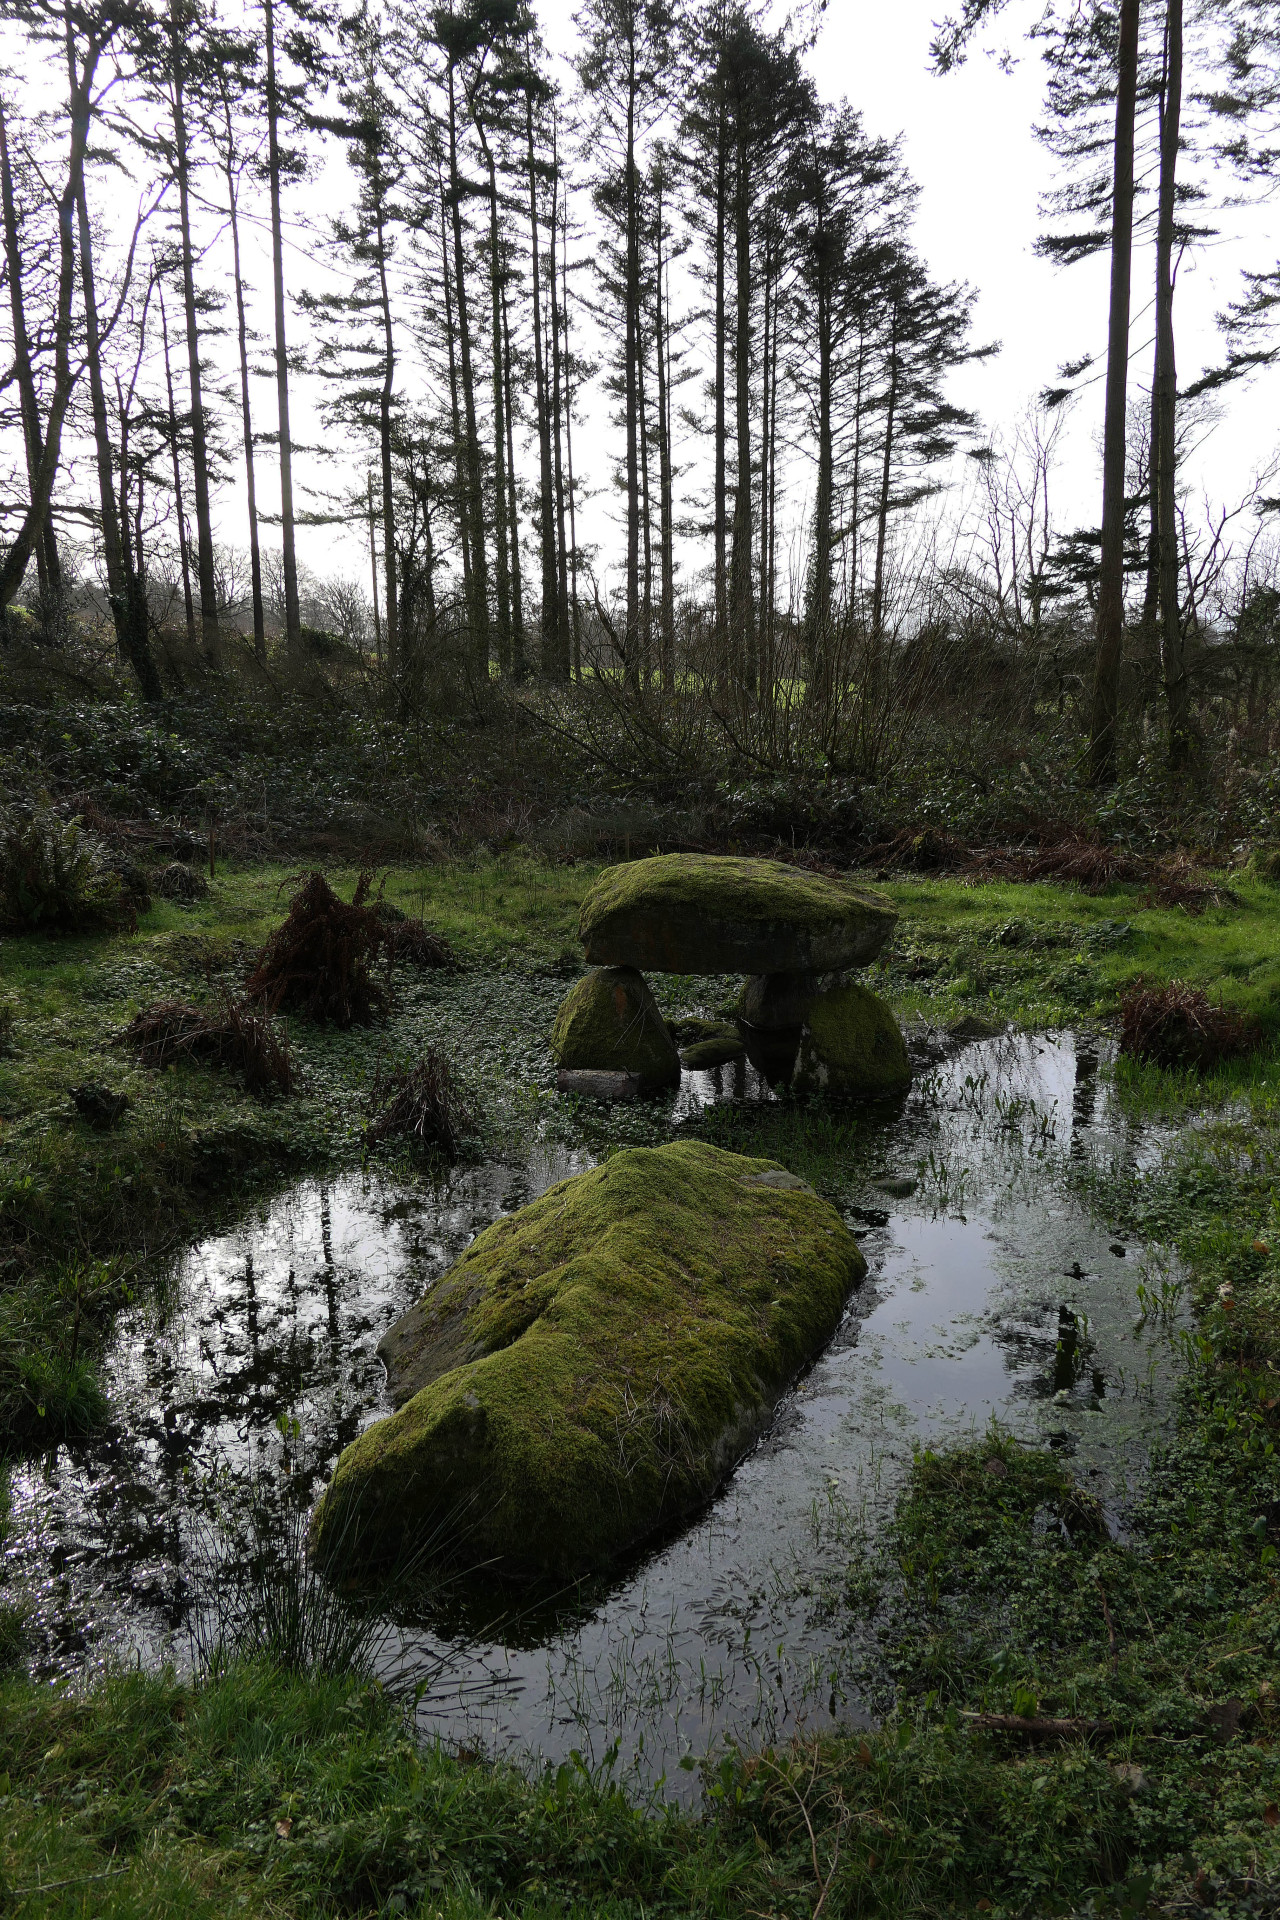 thesilicontribesman: Flooded Cromlech at Parc Glynllifon, North Wales, 16.2.18. It